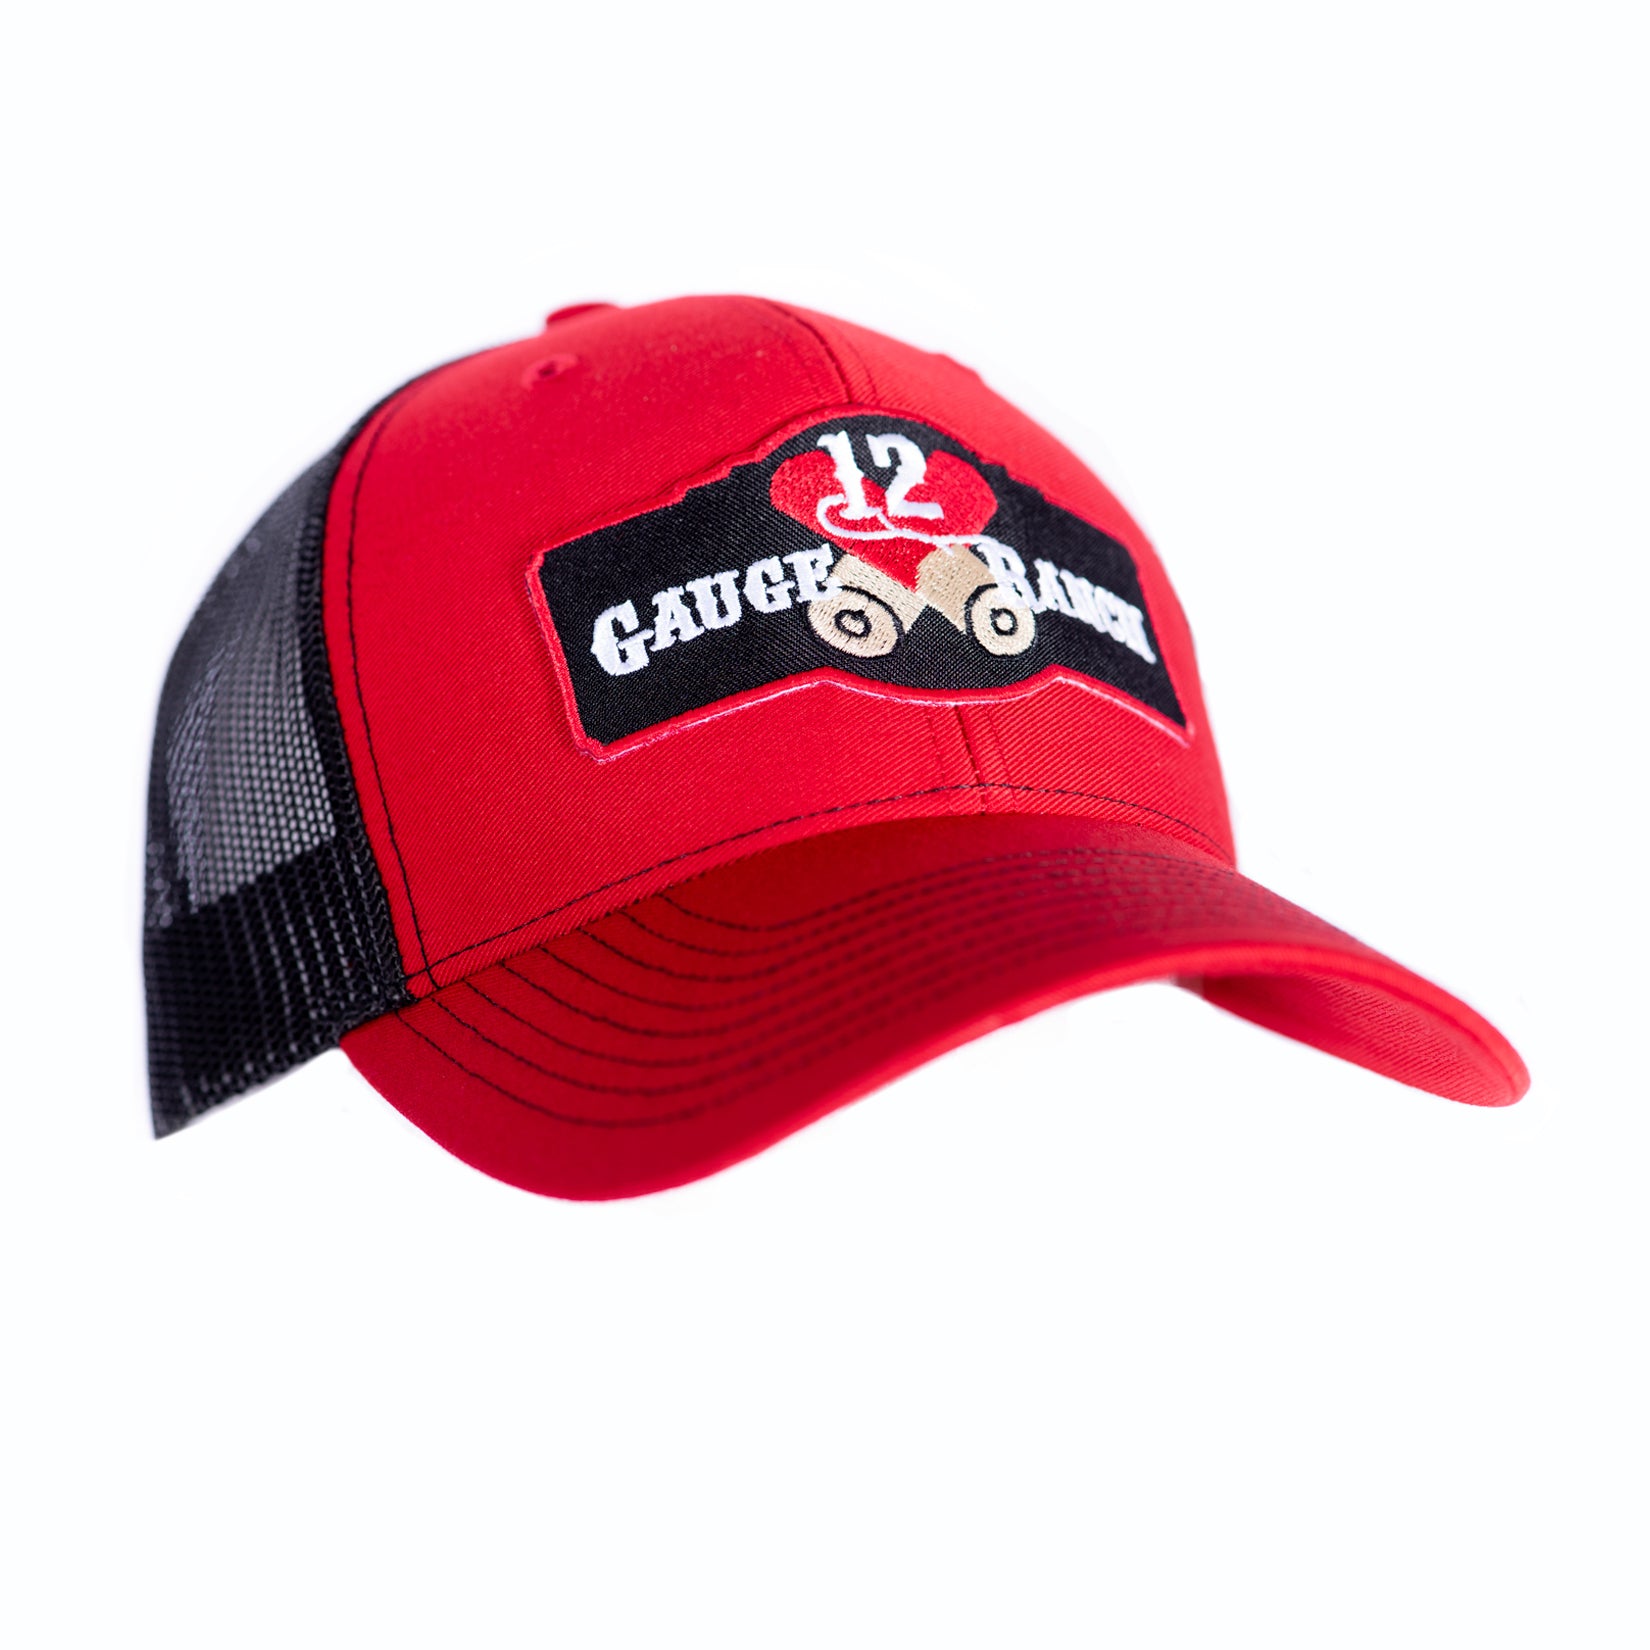 Red and Black 12 Gauge Ranch Baseball Cap (BBH112RB), Hats, 12 Gauge Ranch, 12 Gauge Ranch Ranch  12 Gauge Ranch